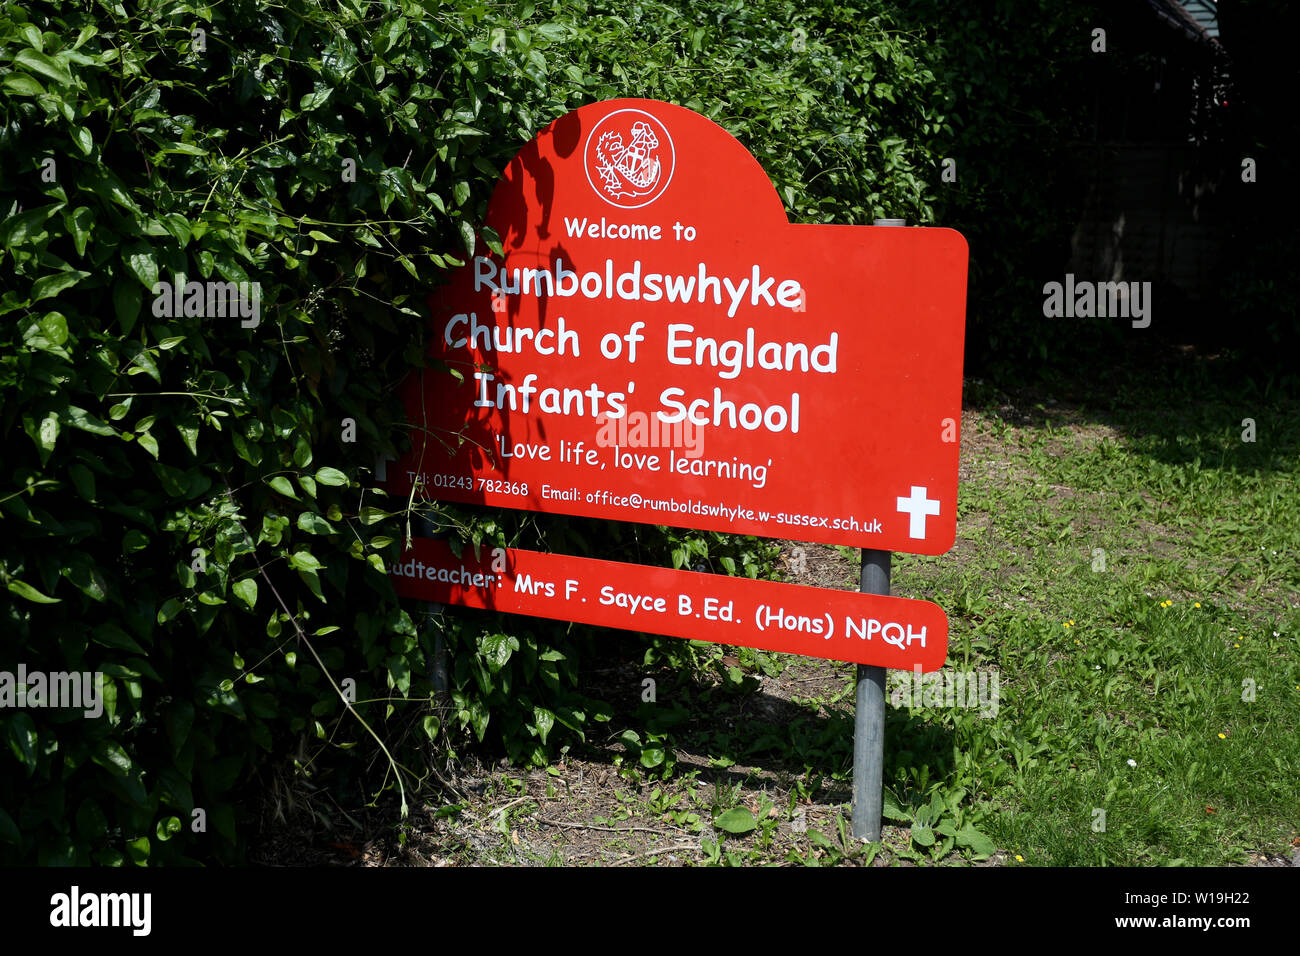 General views of Rumboldswhyke Church of England Infants School in Chichester, West Sussex, UK. The school is due to be closed after council cuts. Stock Photo